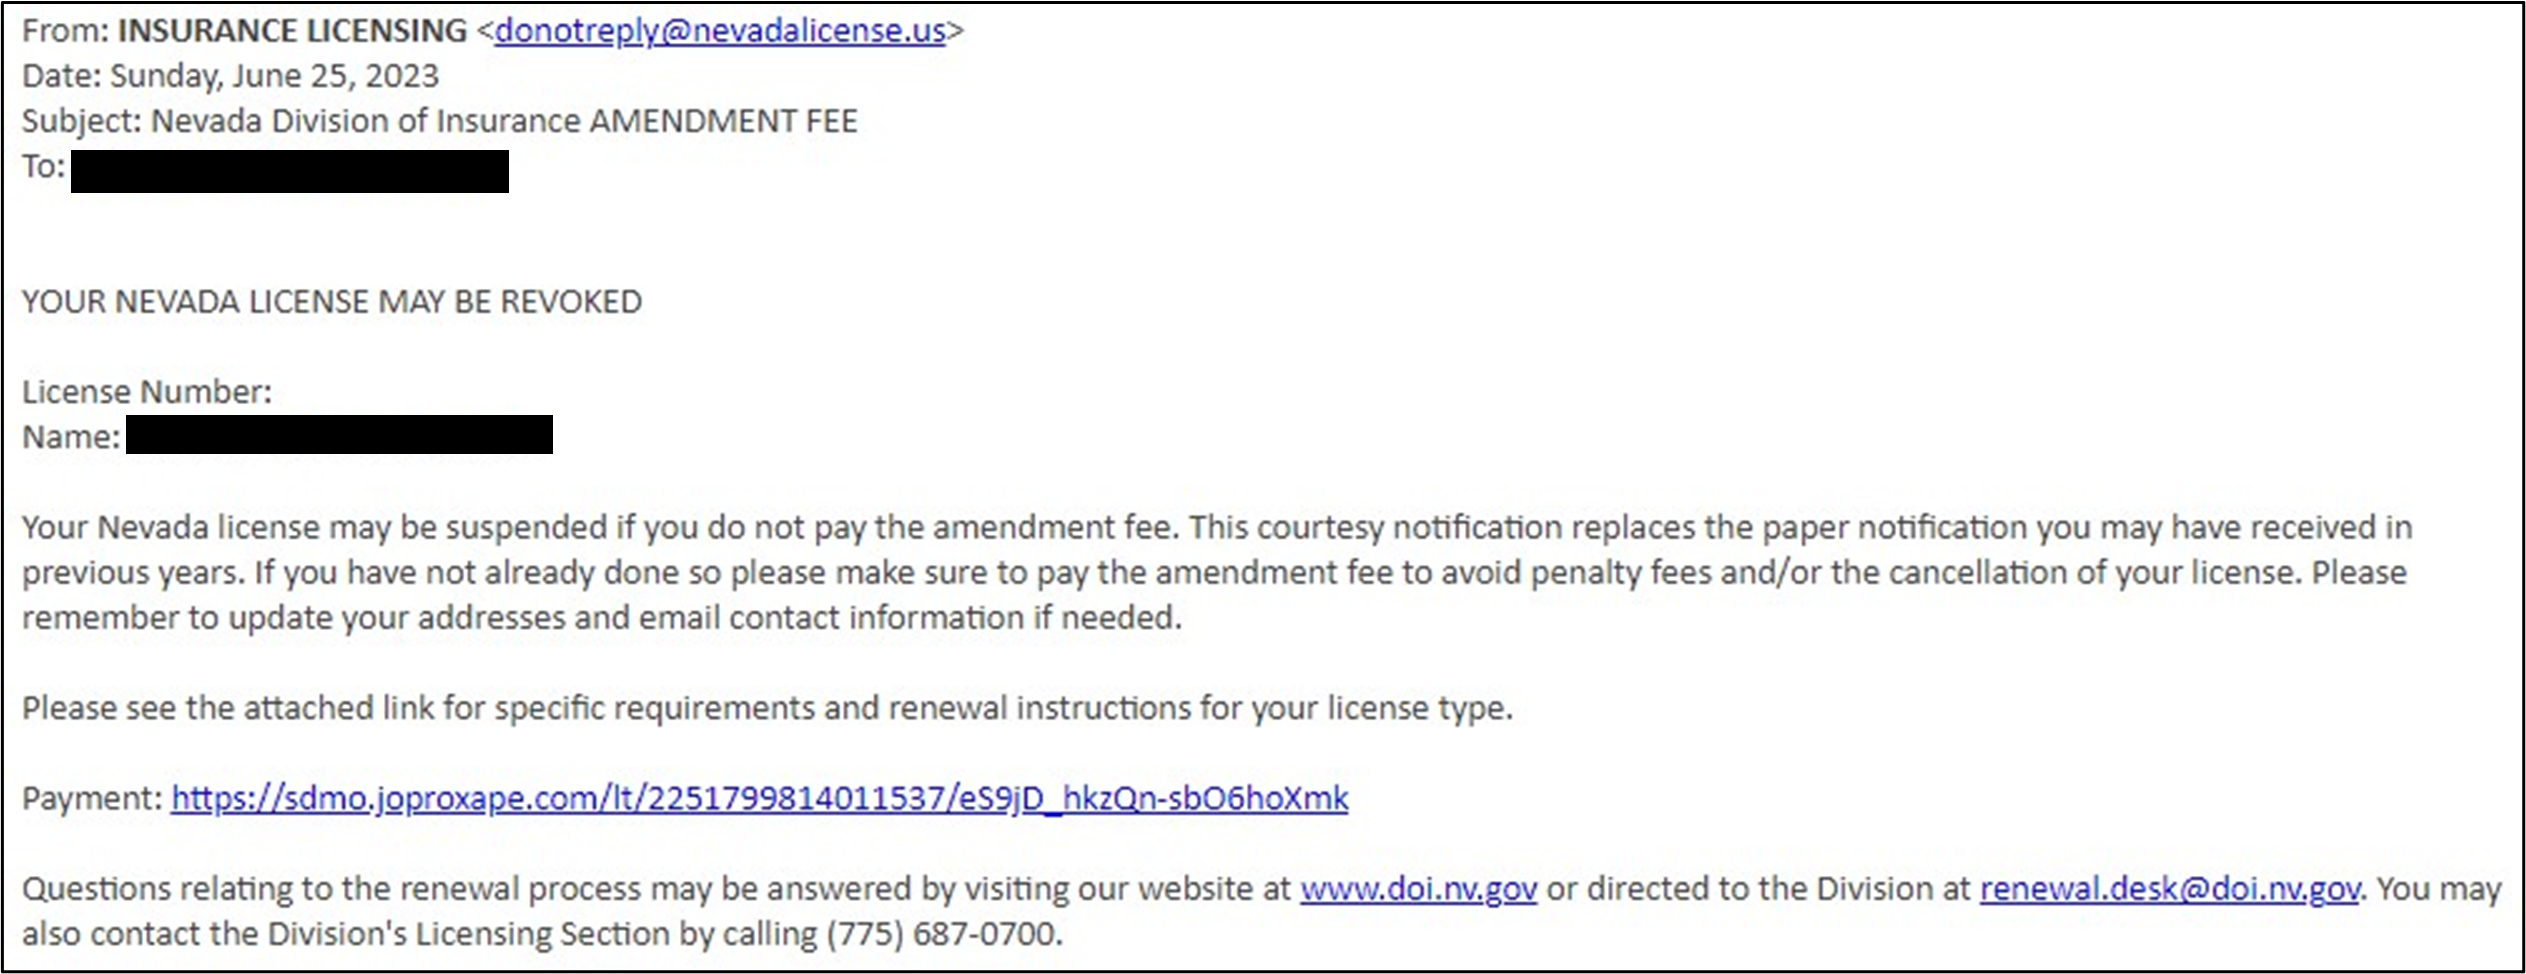 DOI email licensing renewal scam